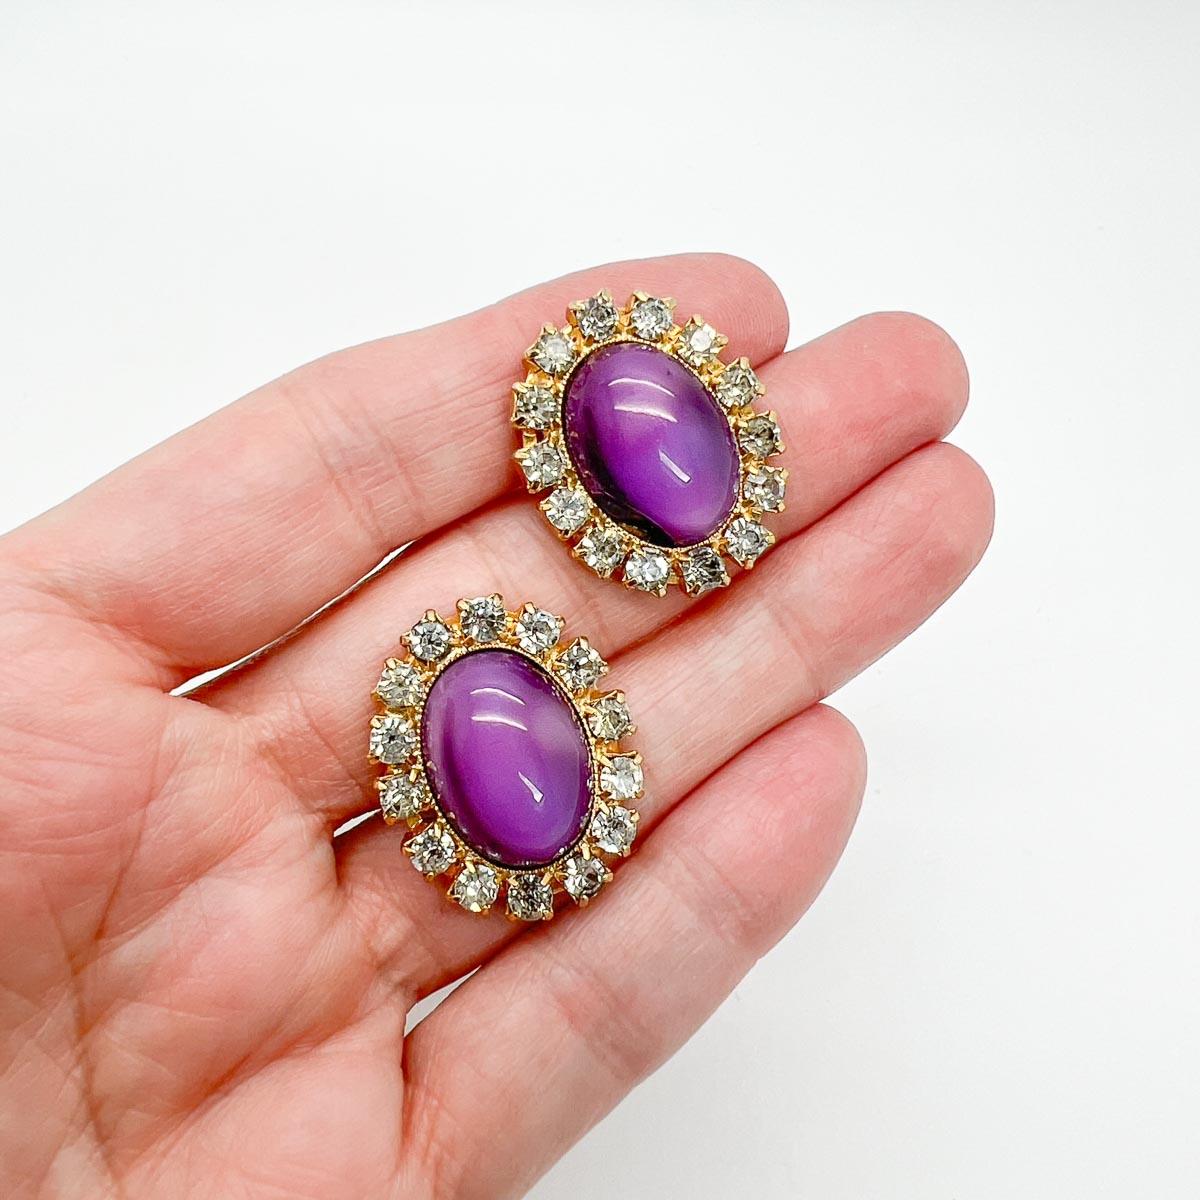 Vintage Amethyst Cabochon Earrings, Royally rich cabochon amethyst glass stones will add a touch of opulence to your look.
An unsigned beauty. A rare treasure. Just because a jewel doesn’t have a designer name, doesn’t mean that isn’t coveted. The